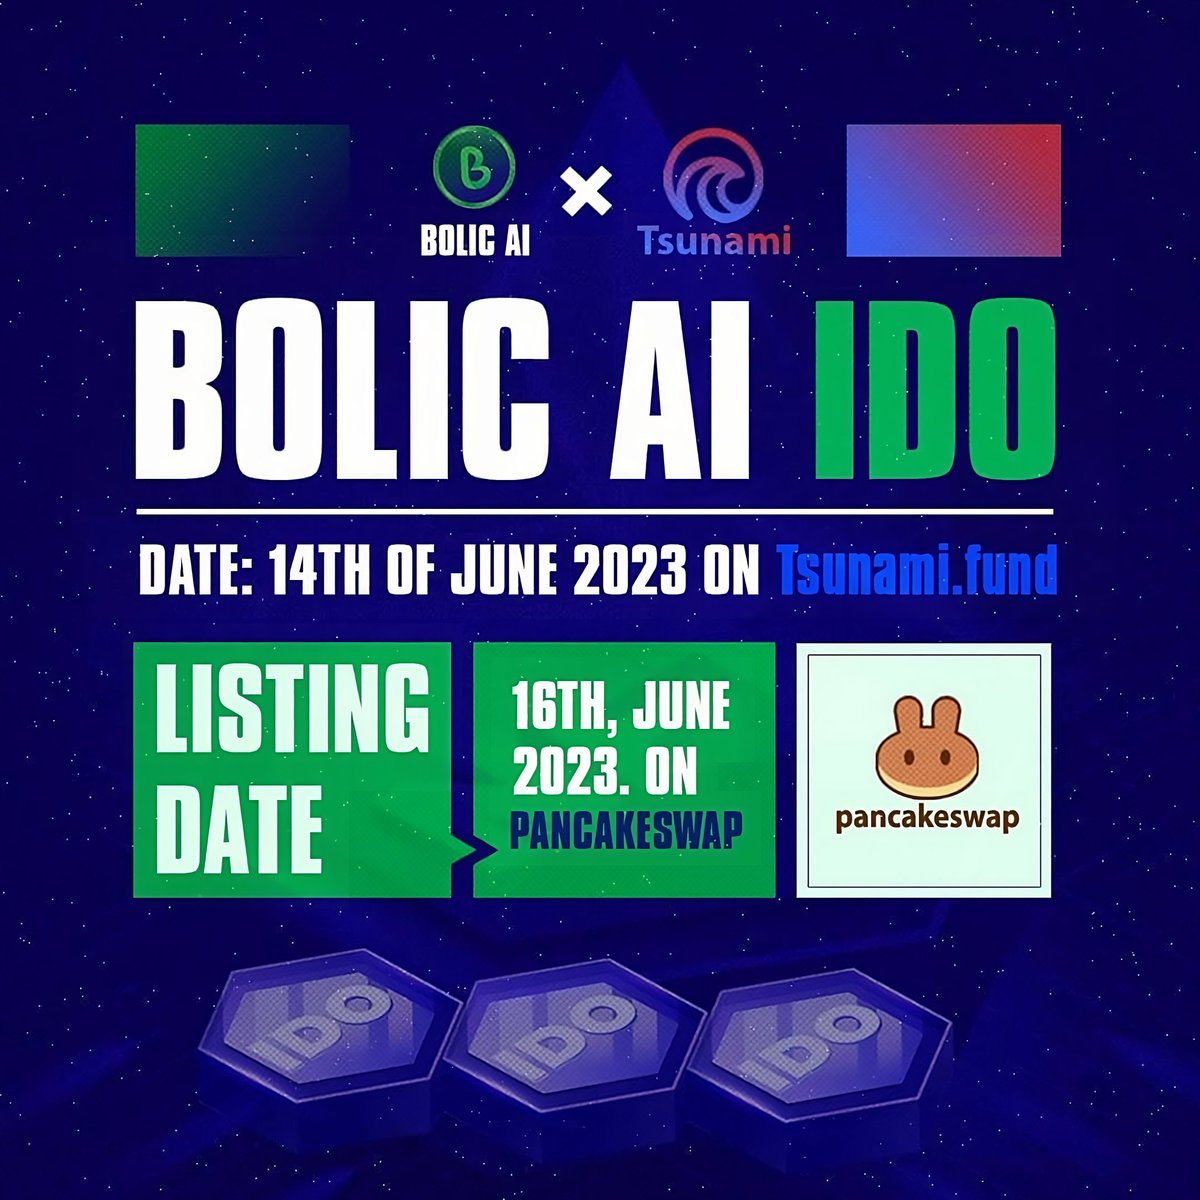 Exciting news! Our highly anticipated IDO will take place on Tsunami, June 14th, 2023. Don't miss out on the opportunity to be part of our revolutionary project. Stay tuned for more details on how to participate.

tsunami.fund/projects/BOLIC…

#IDO #presale #WLGiveaways #AI #BSC #BTC